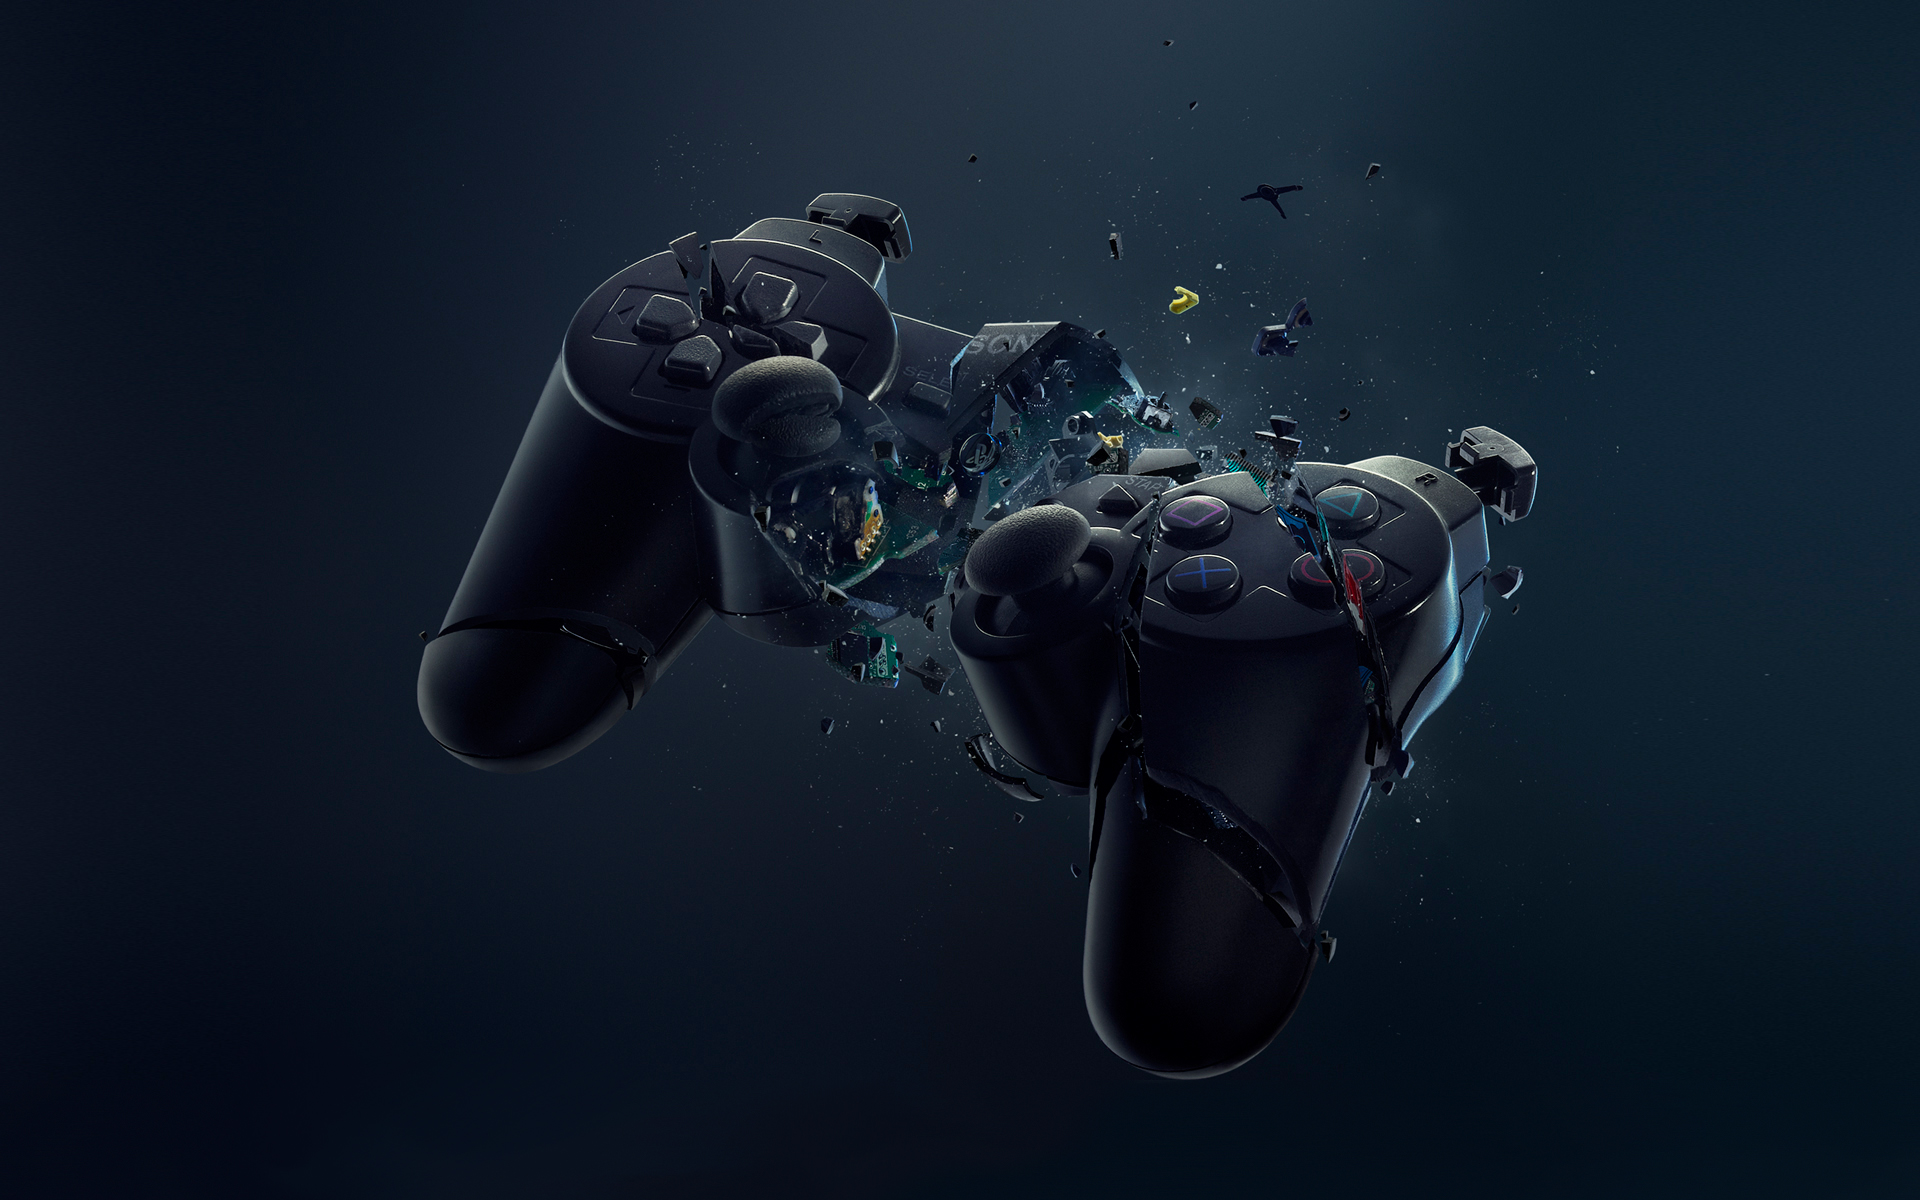 40+ Playstation HD Wallpapers and Backgrounds